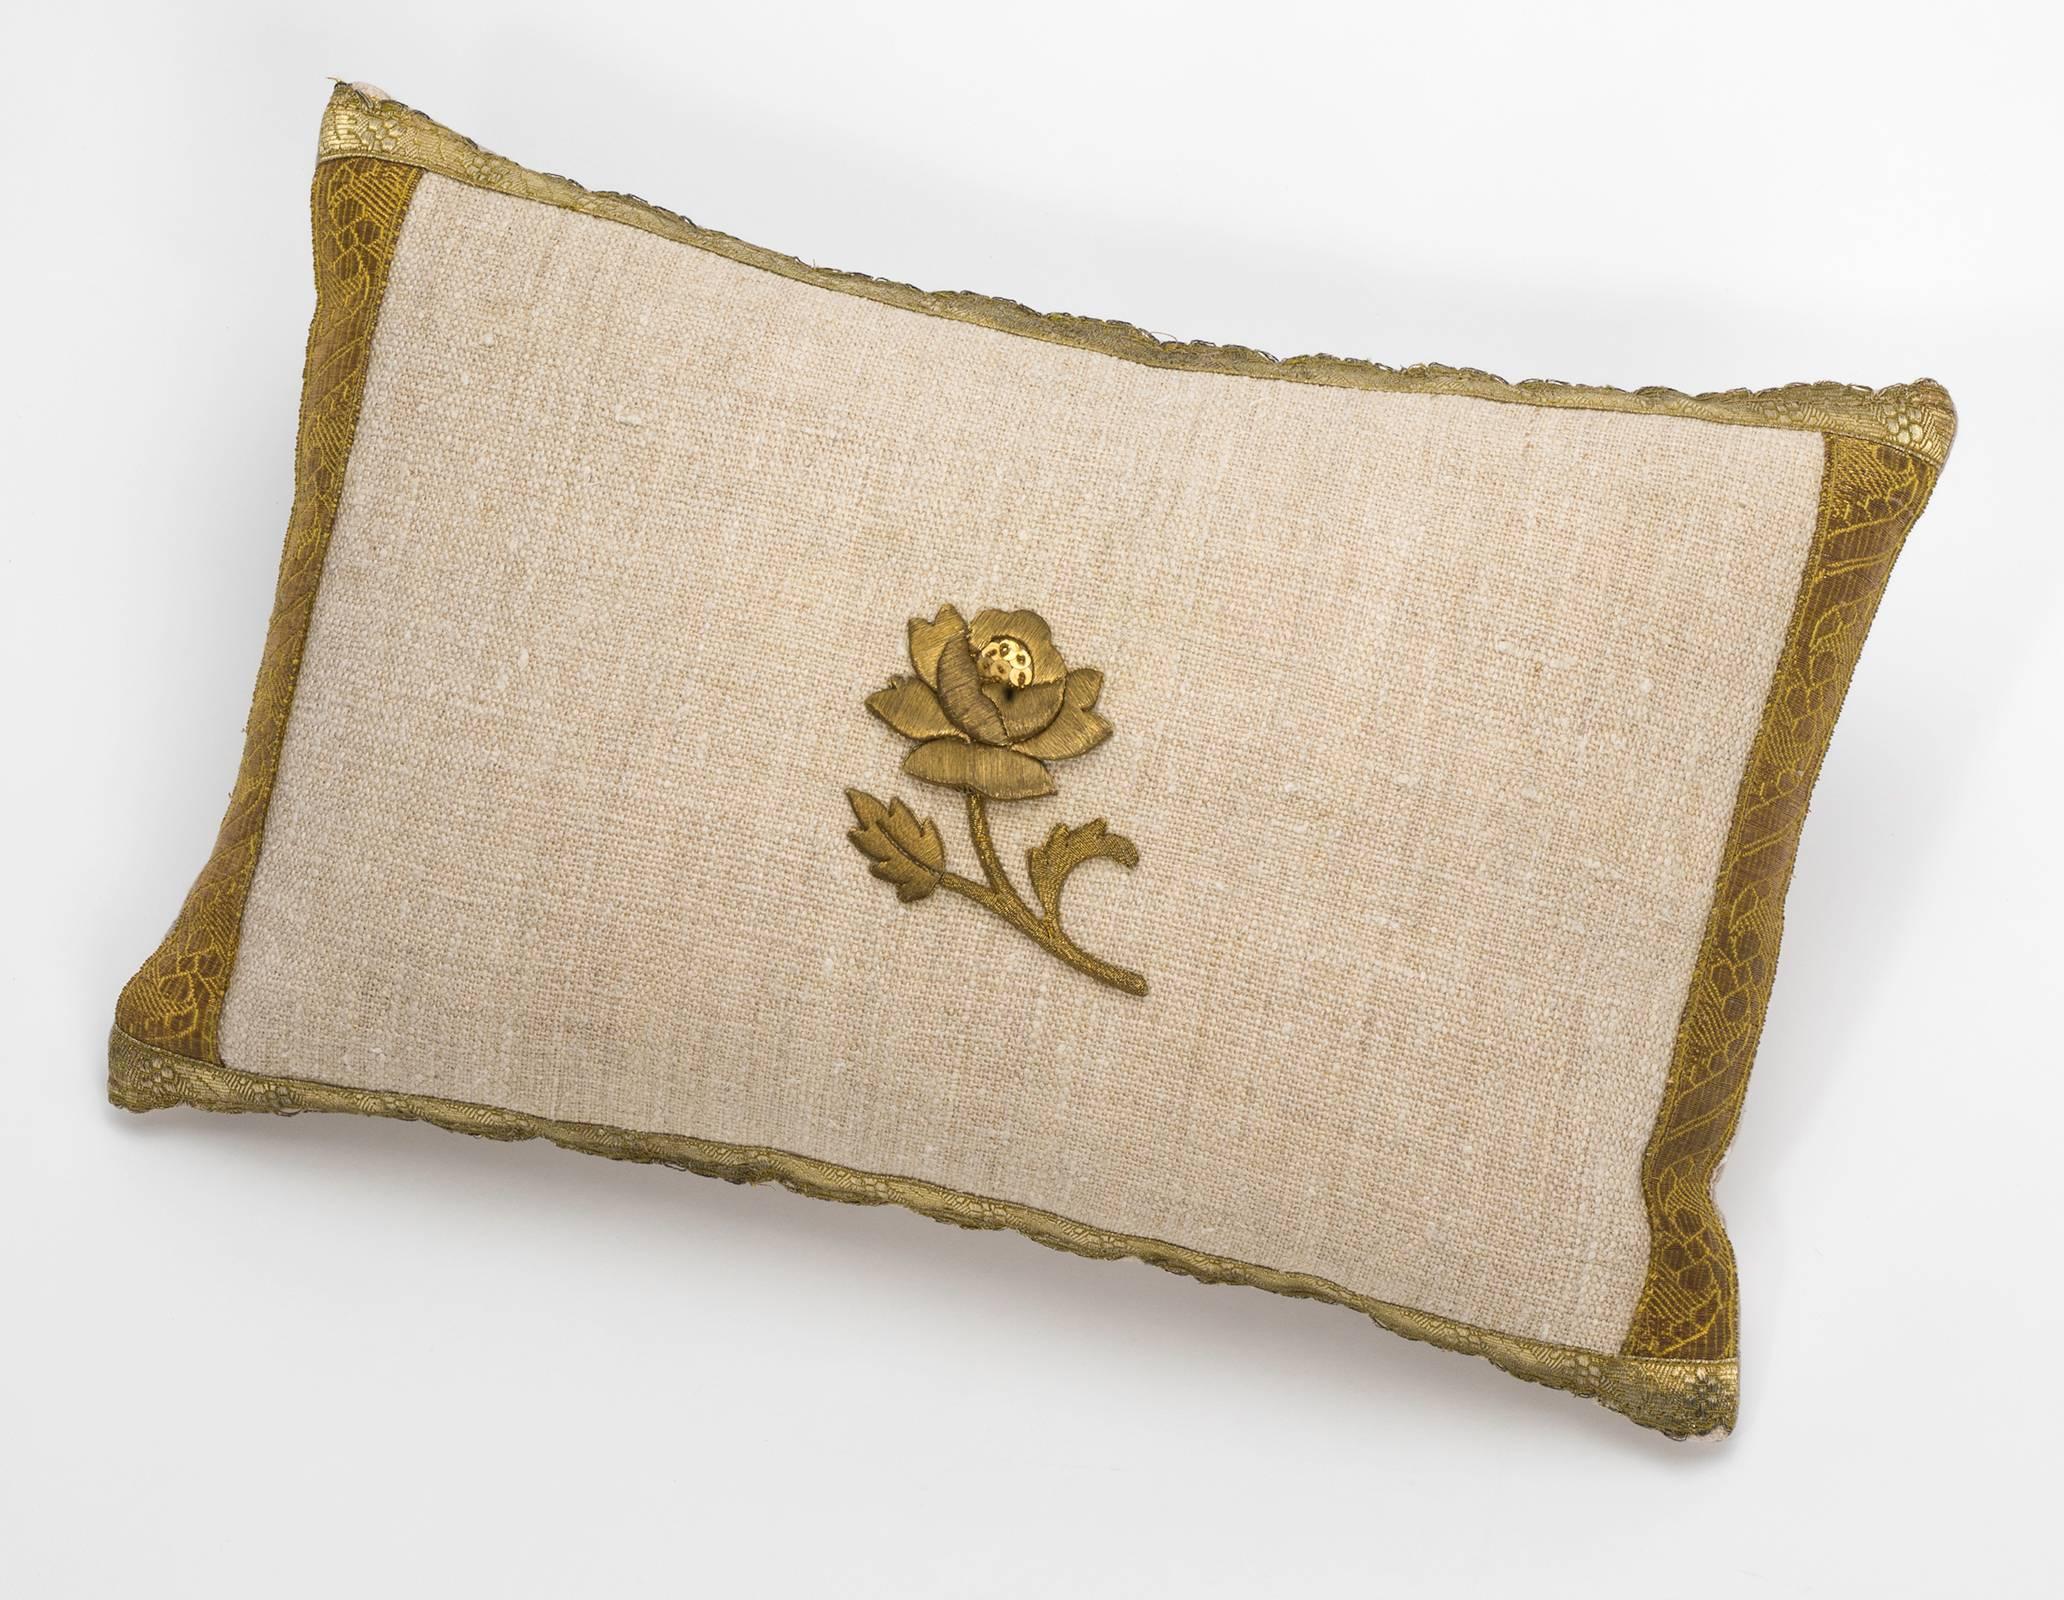 Newly made, vintage linen pillow with 19th century metallic gold thread rose appliqué. Bordered with antique gold trims. Plain linen back. Filled with new feather down insert.